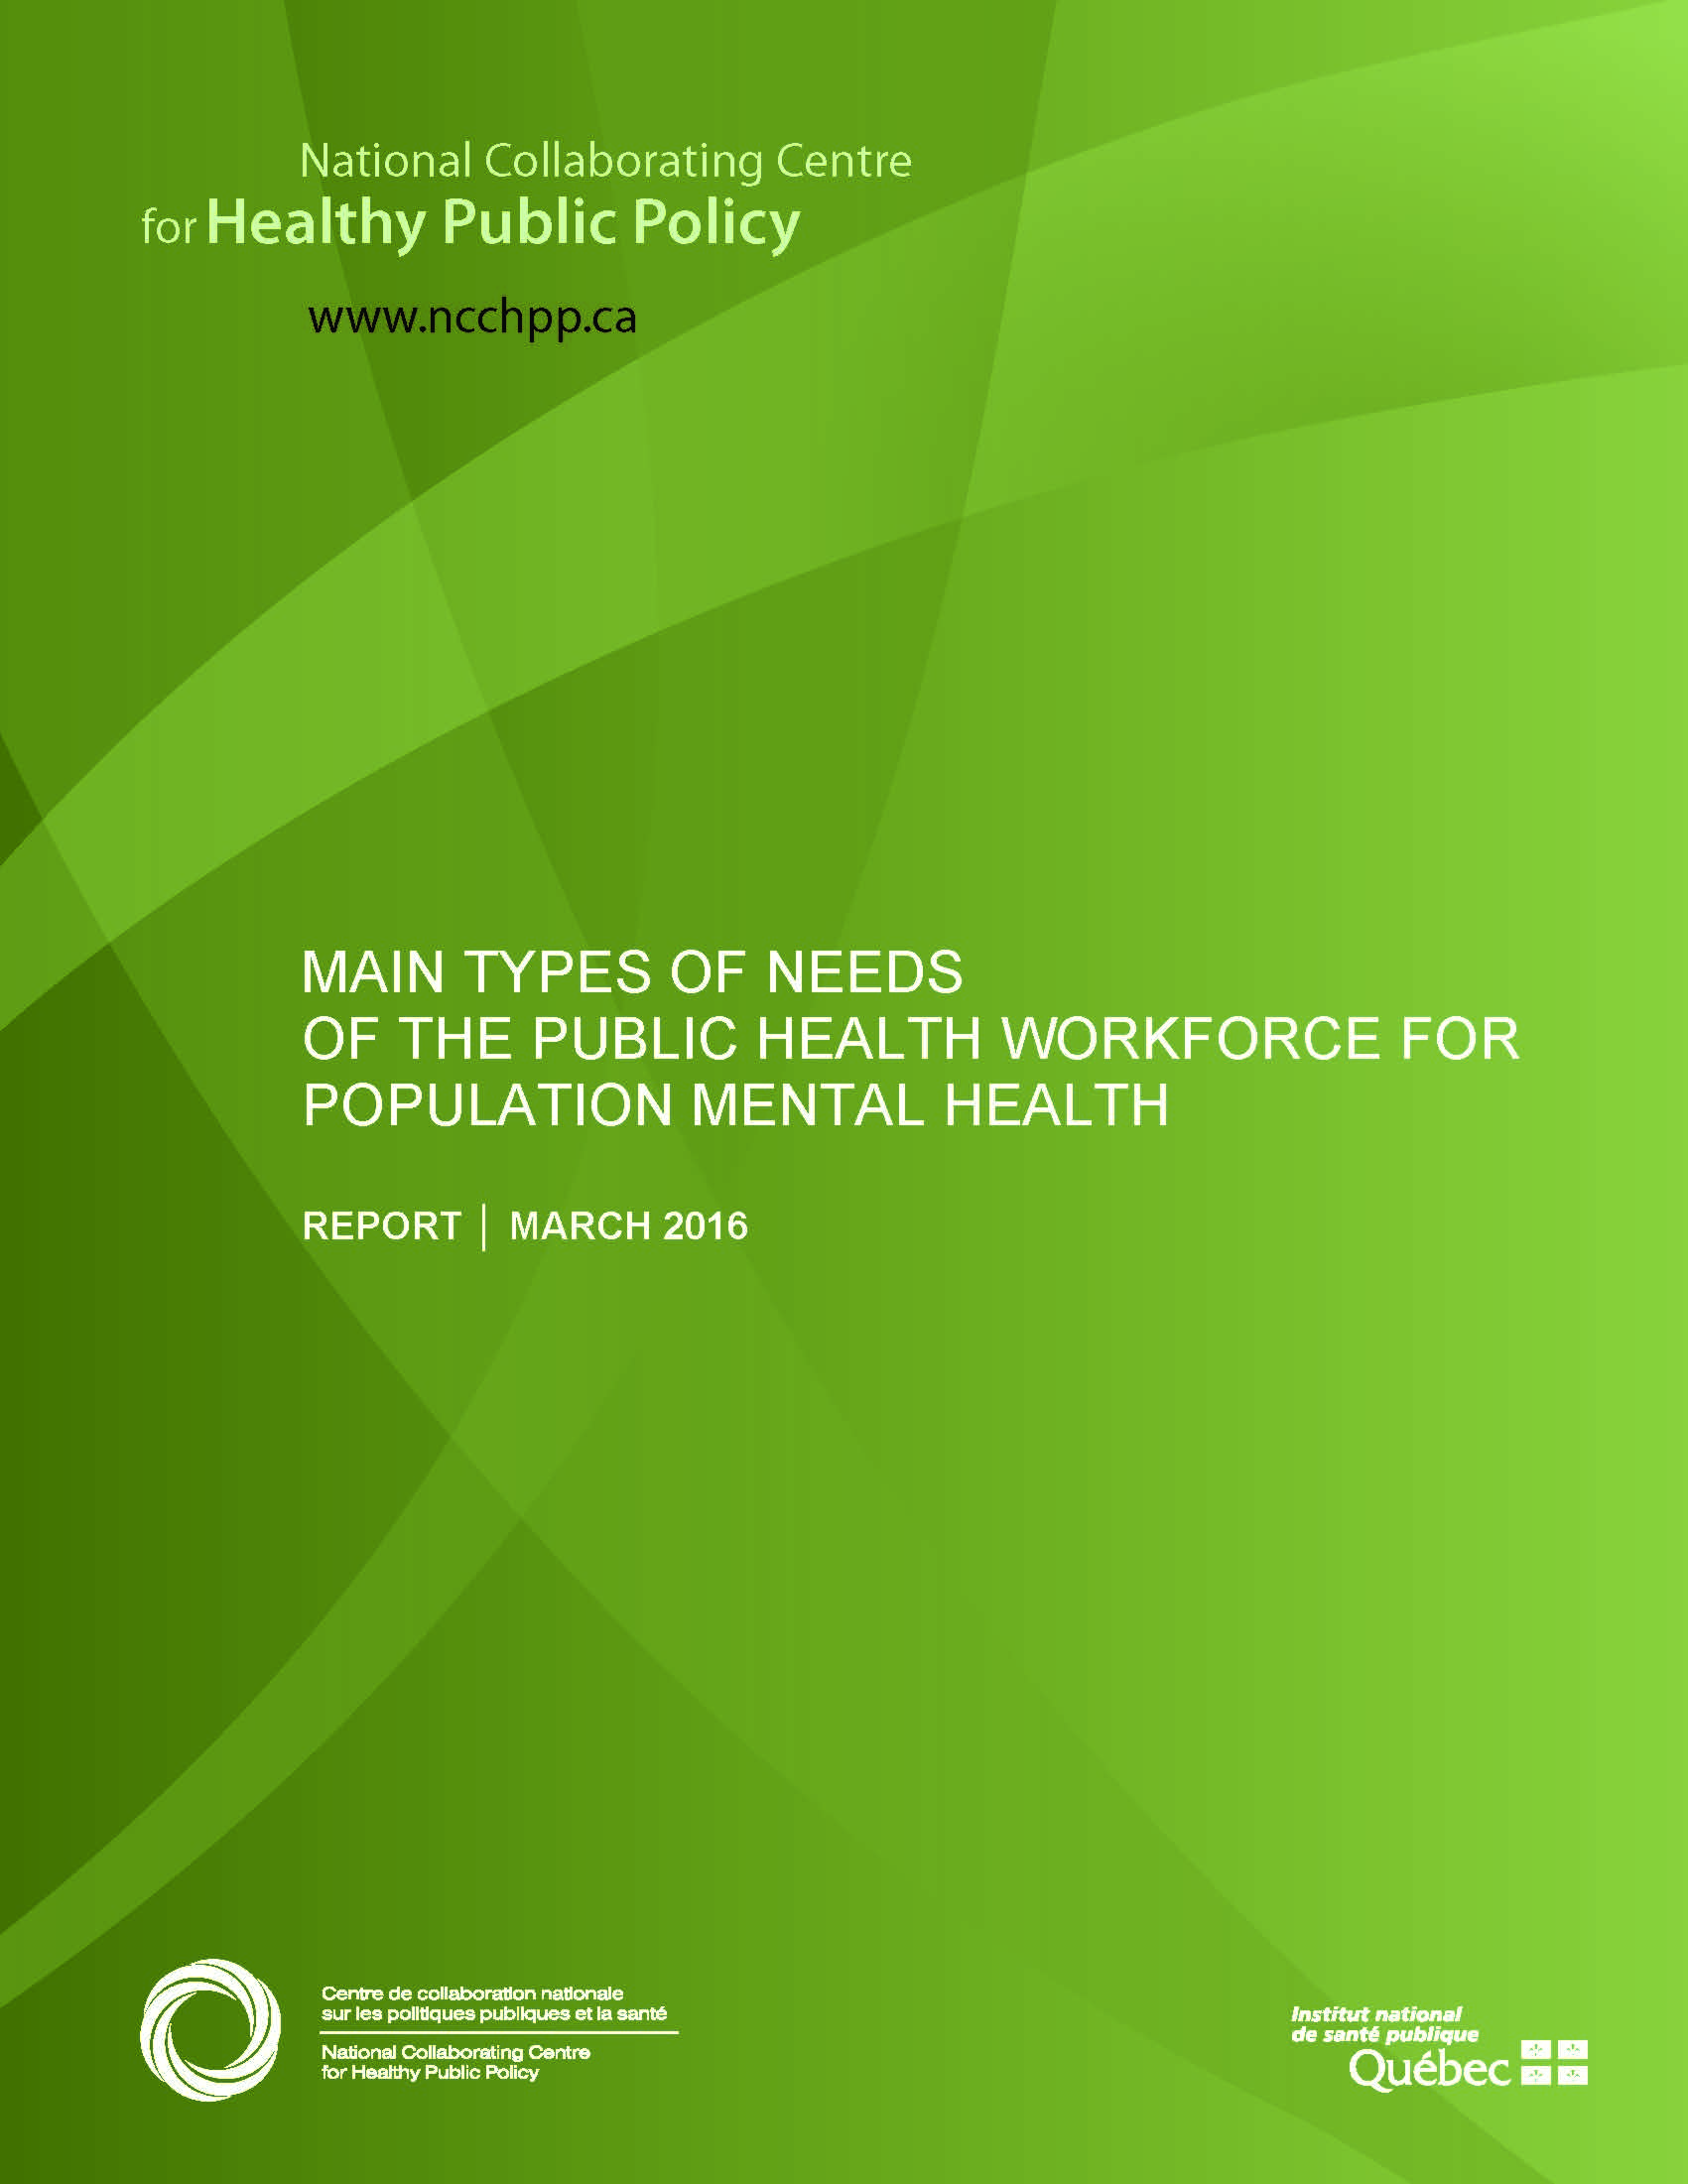 Main Types of Needs of the Public Health Workforce for Population Mental Health